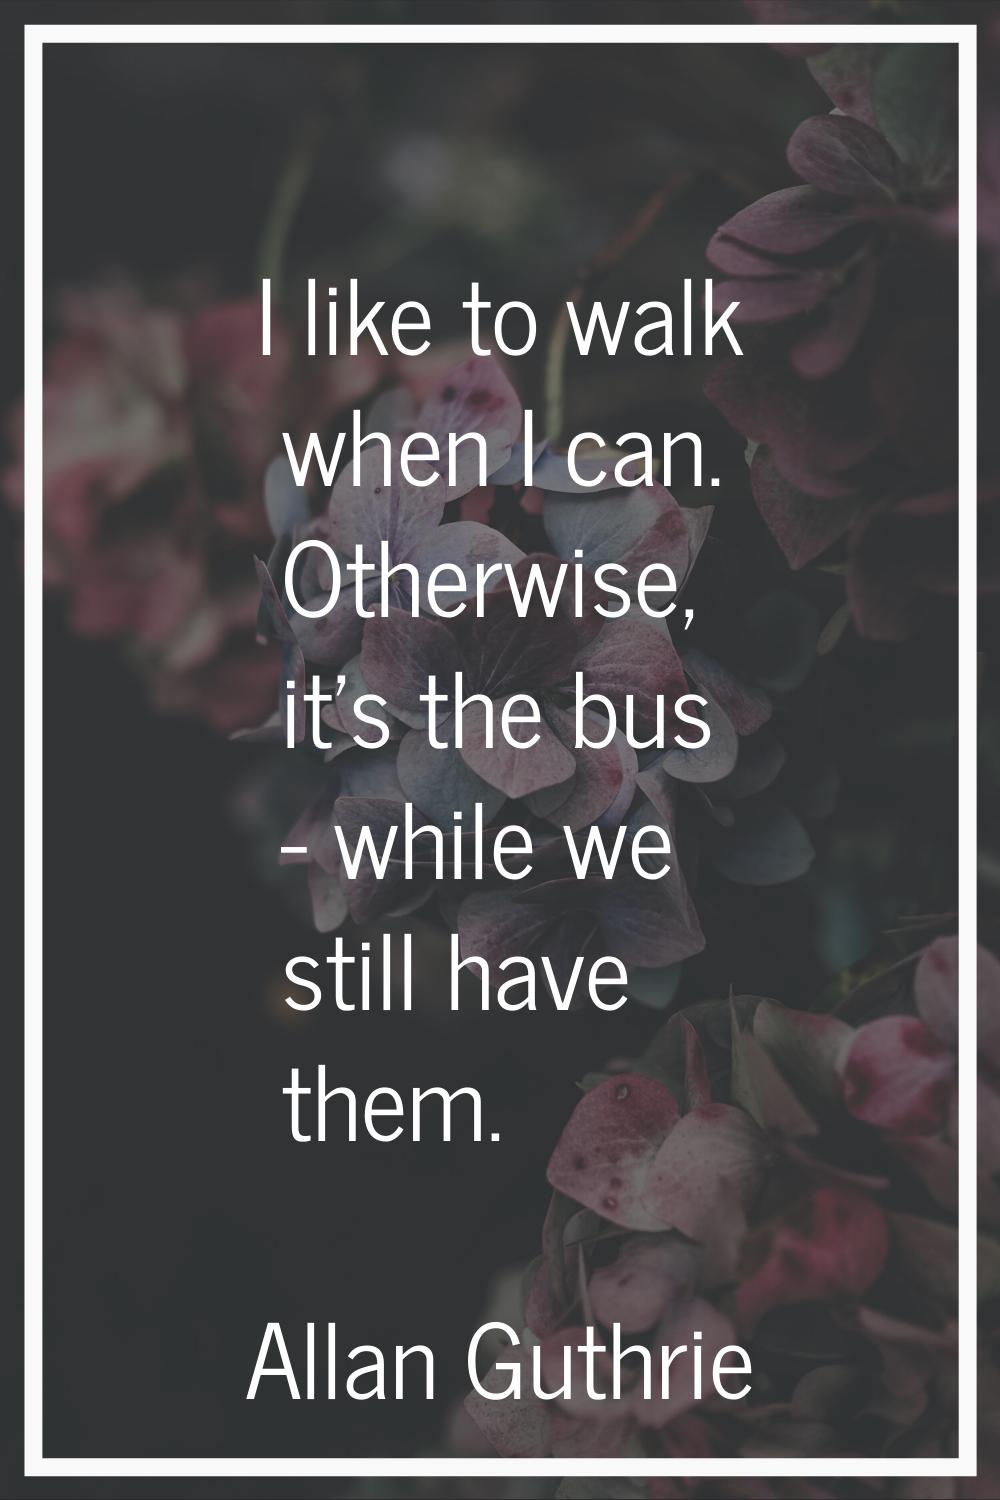 I like to walk when I can. Otherwise, it's the bus - while we still have them.